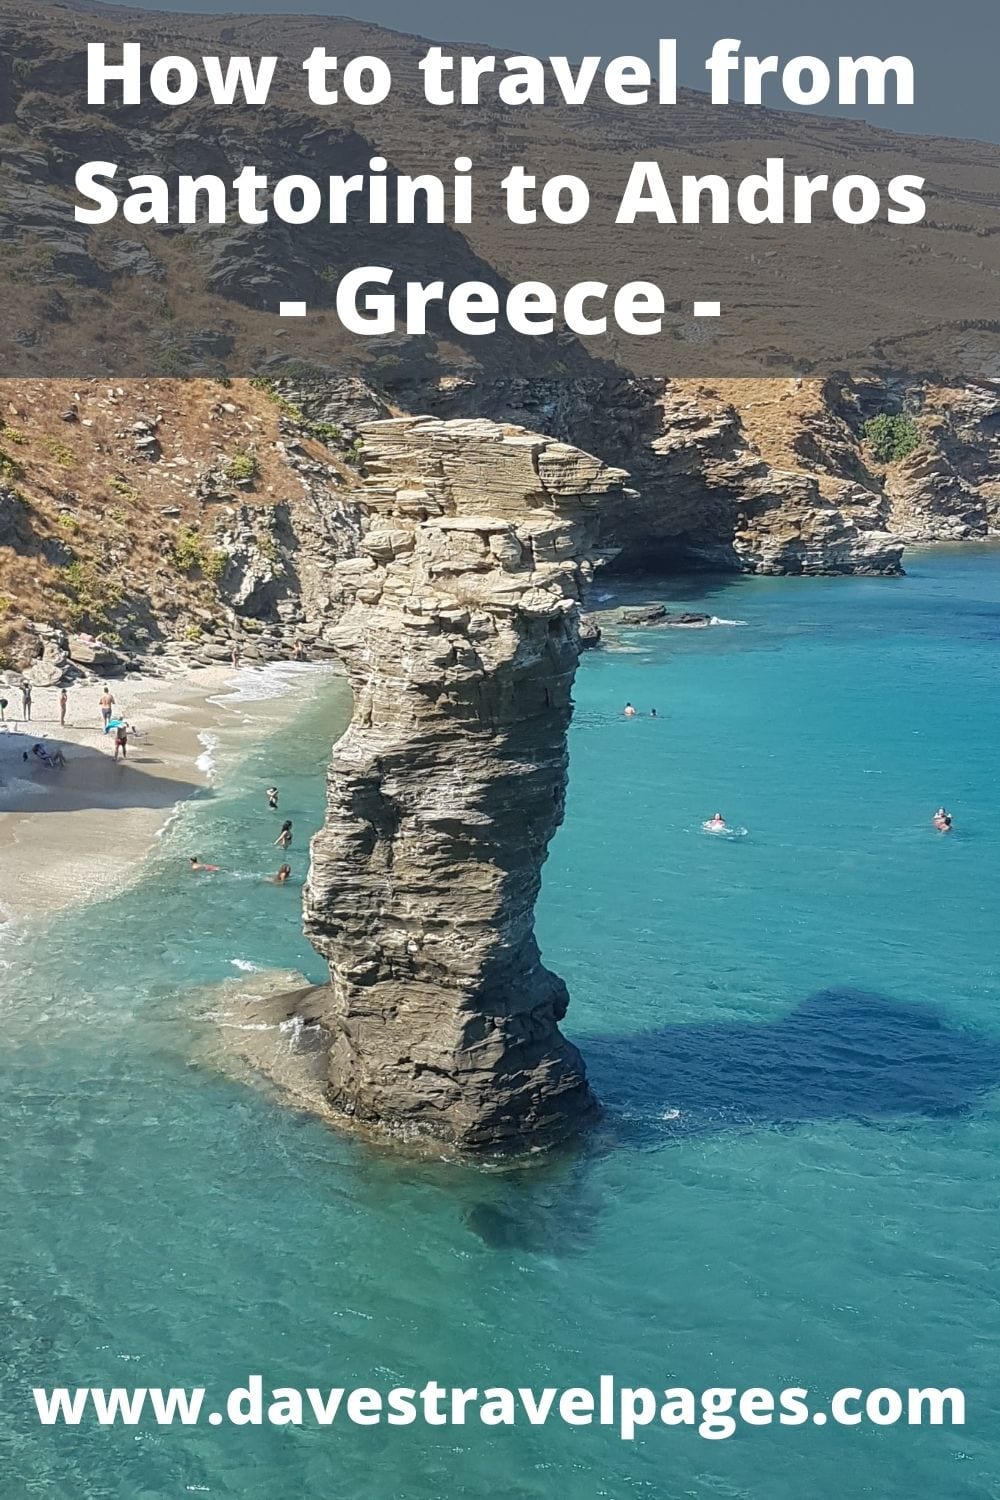 How to get to Andros island in Greece from Santorini by ferry